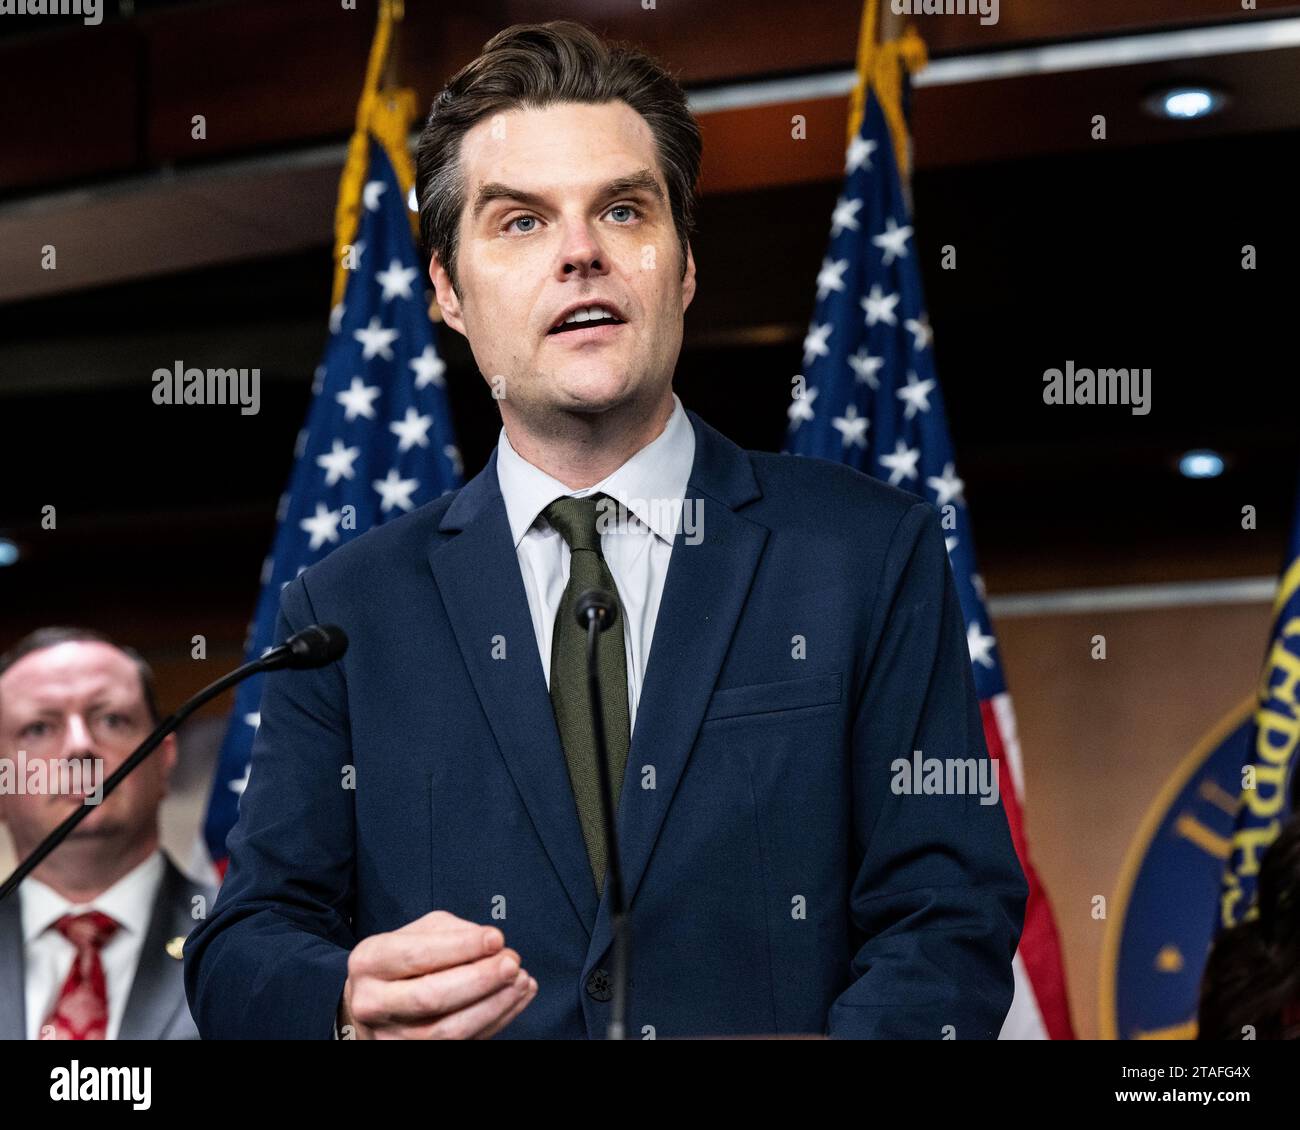 Washington, United States. 30th Nov, 2023. U.S. Representative Matt Gaetz (R-FL) speaking at a press conference about government transparency about Unidentified Aerial Phenomena (UAP) at the U.S. Capitol. (Photo by Michael Brochstein/Sipa USA) Credit: Sipa USA/Alamy Live News Stock Photo